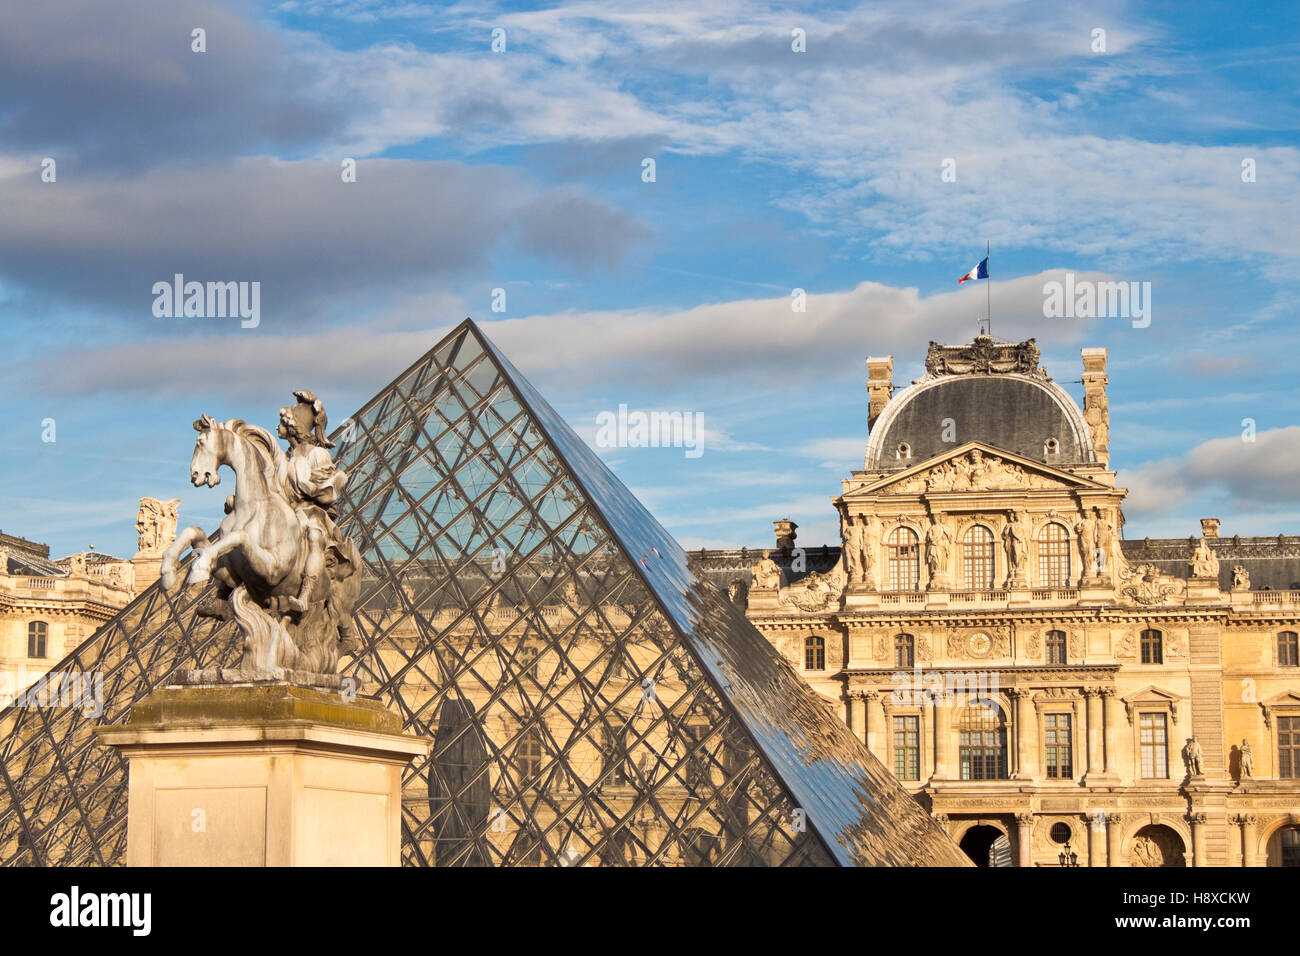 PARIS - SEPTEMBER 19, 2013: Equestrian statue of king Louis XIV in front of Louvre Palace and  the Pyramid in Paris, France. Stock Photo